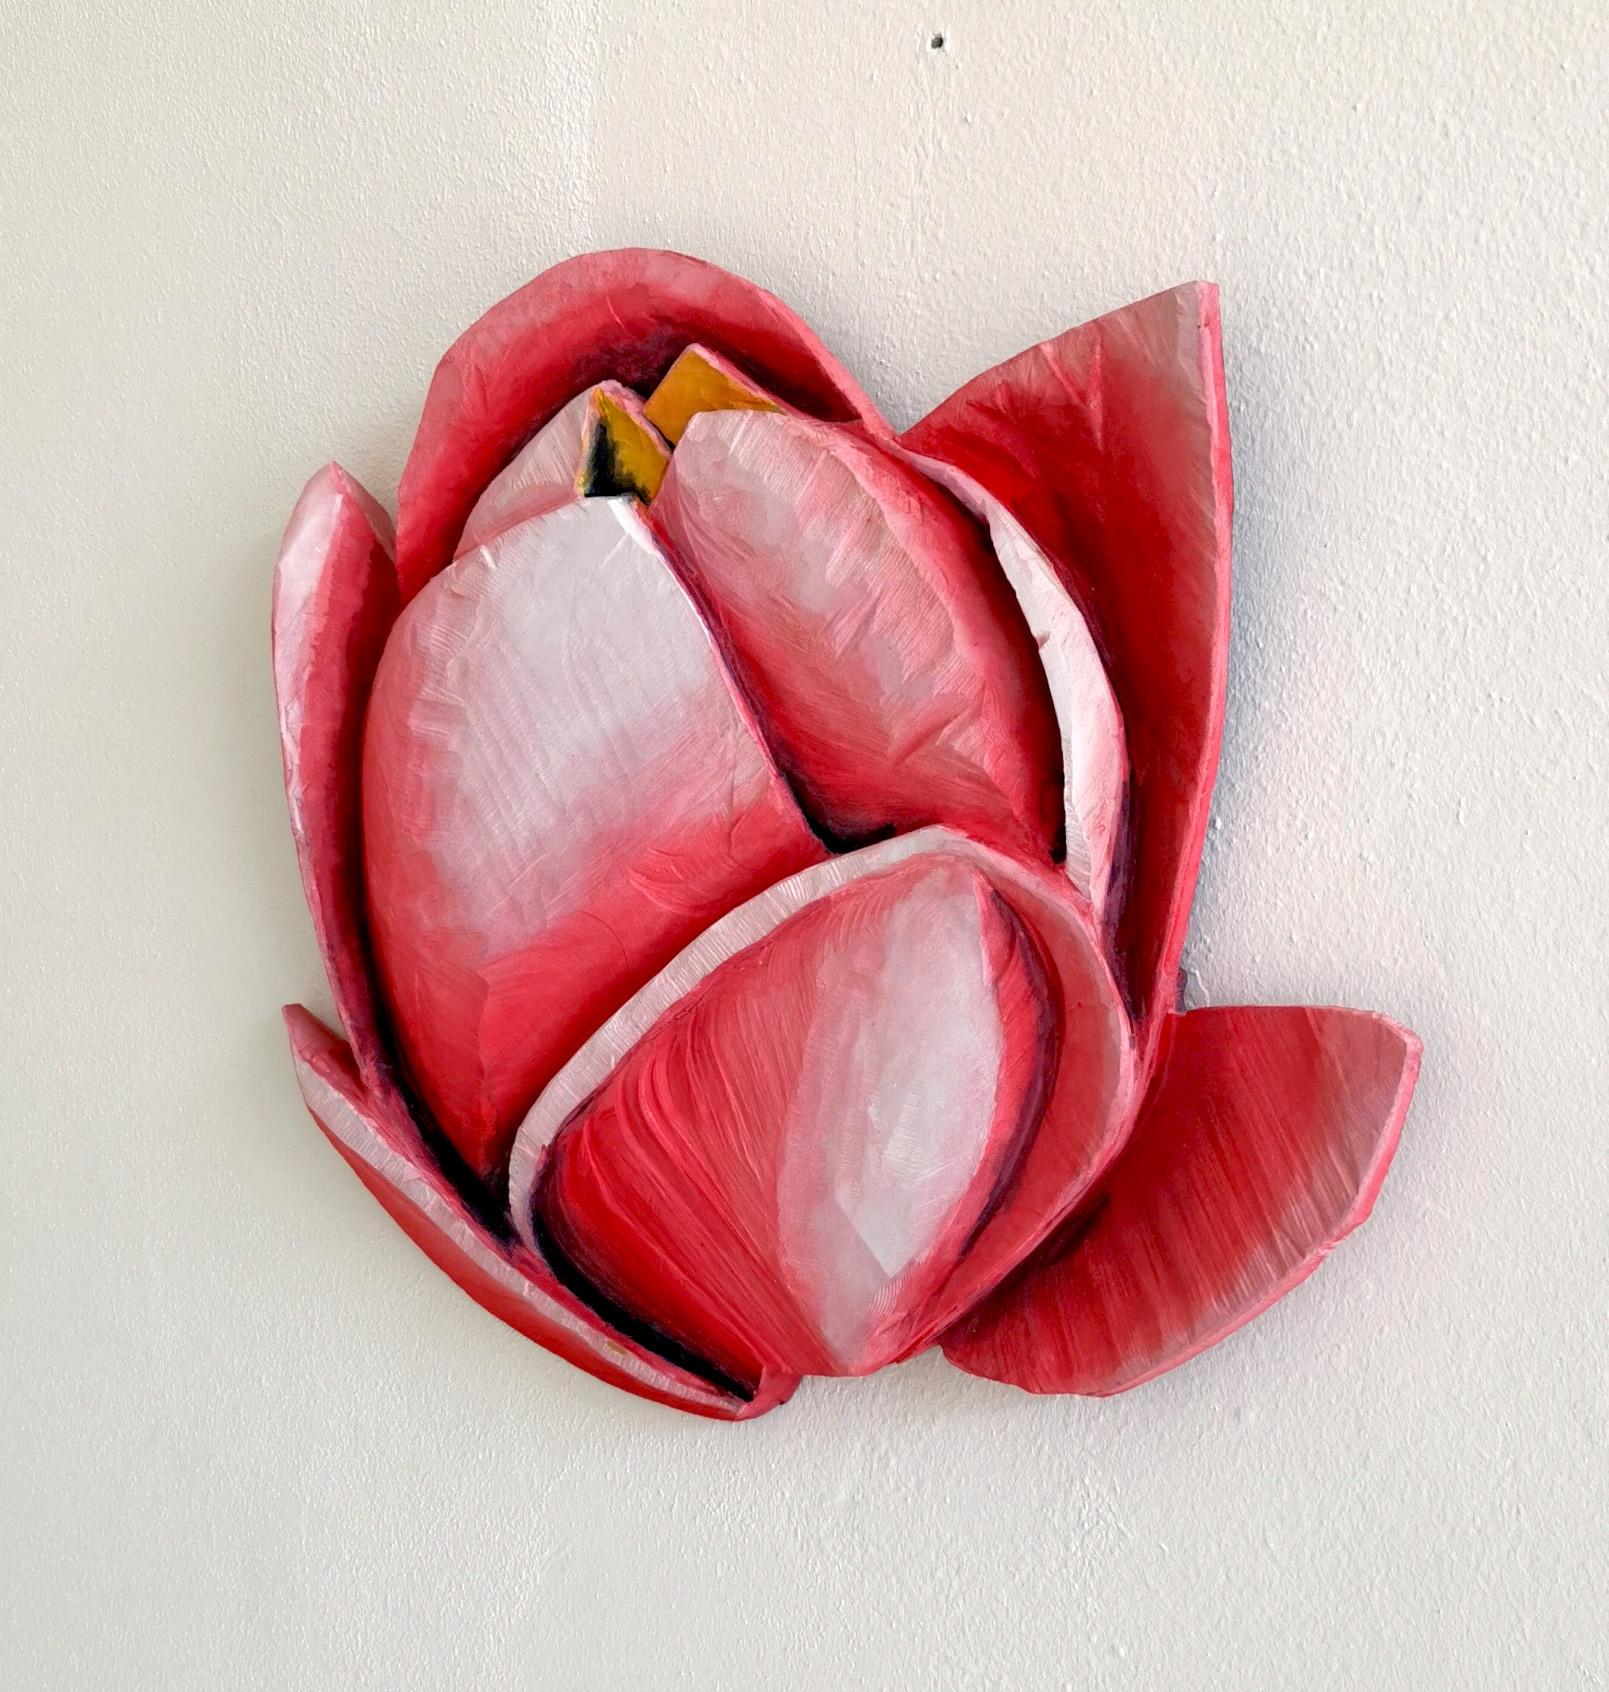 Bloom 3 by Isabel Ritter - Contemporary Wall Flower sculpture  2